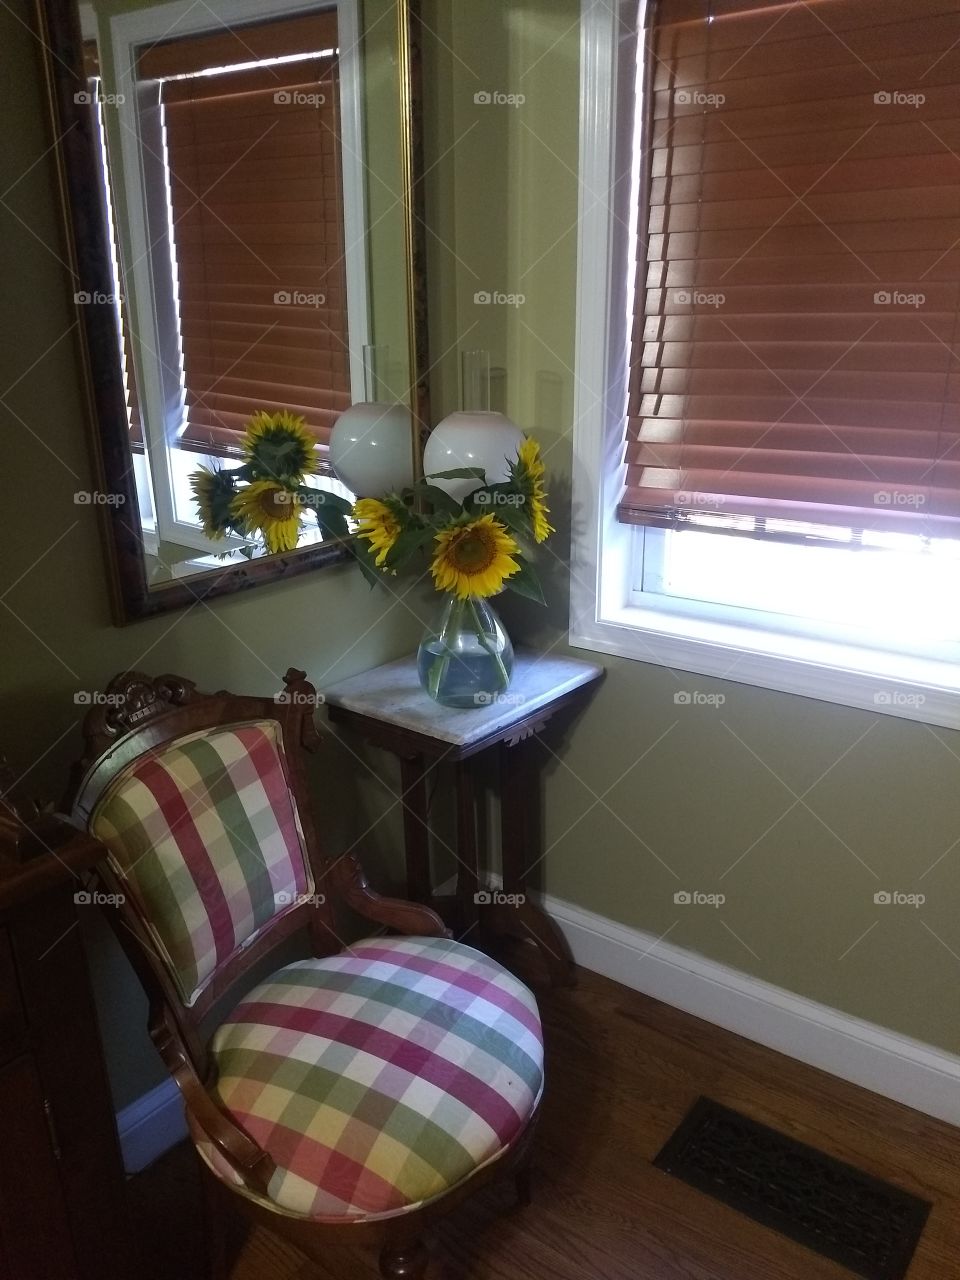 my summer garden window seat with antiques and a pop of color